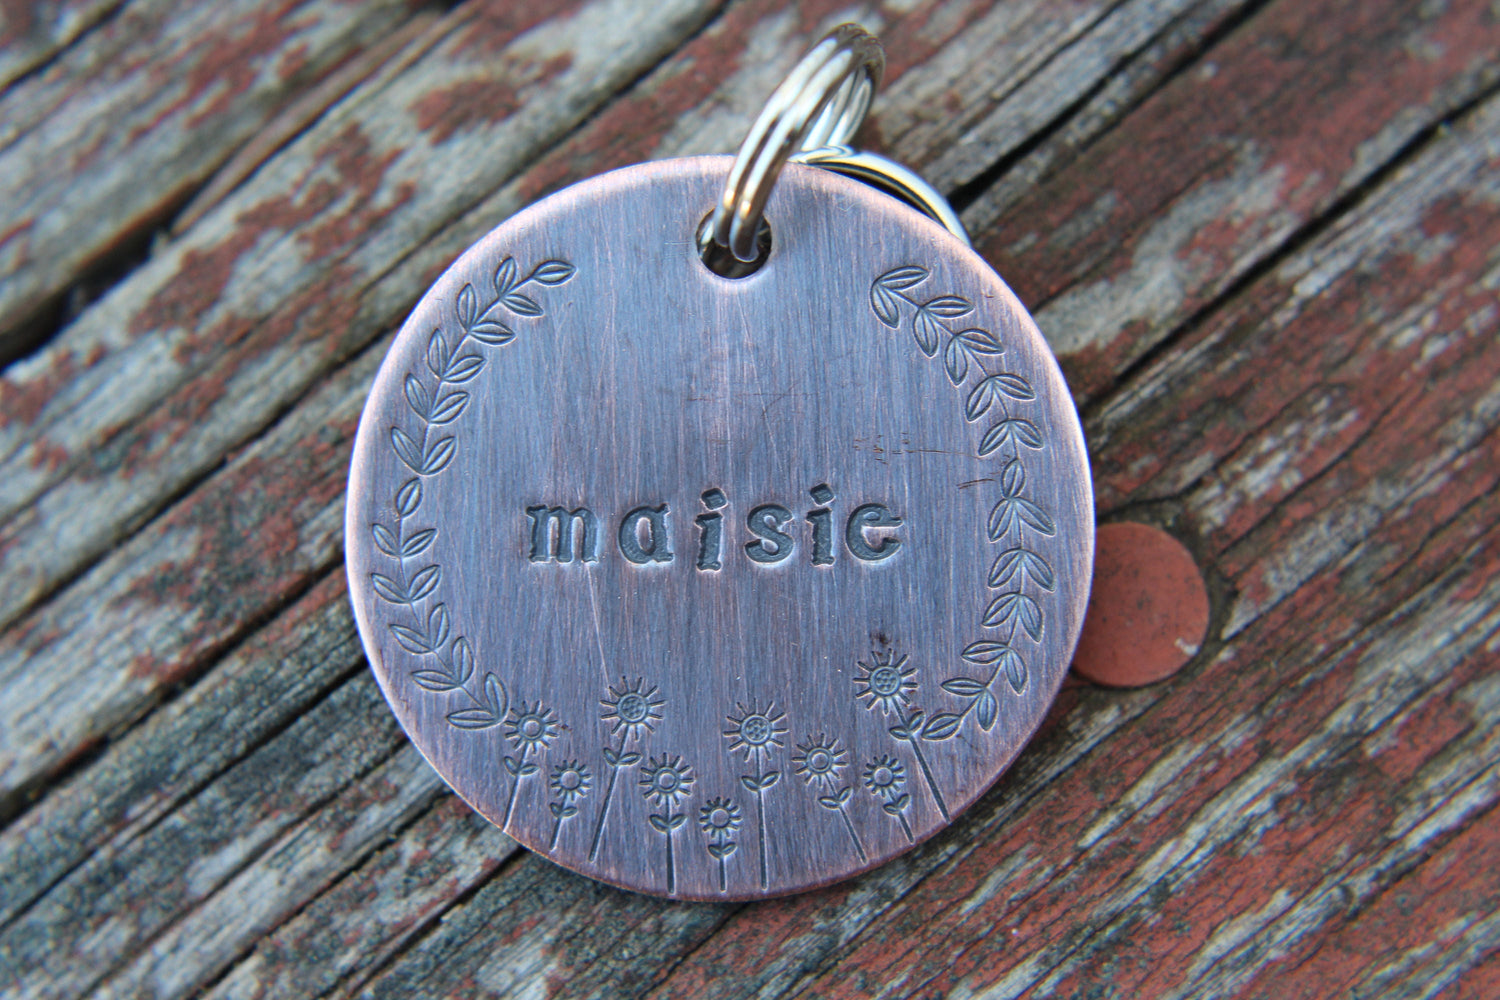 Custom ID Dog Tag, The Maisie, Hand Stamped Dog Tag, Tag for Dog, Puppy Tag, Tag with Flowers, Copper Dog Tag, Pet ID, Identification Tag